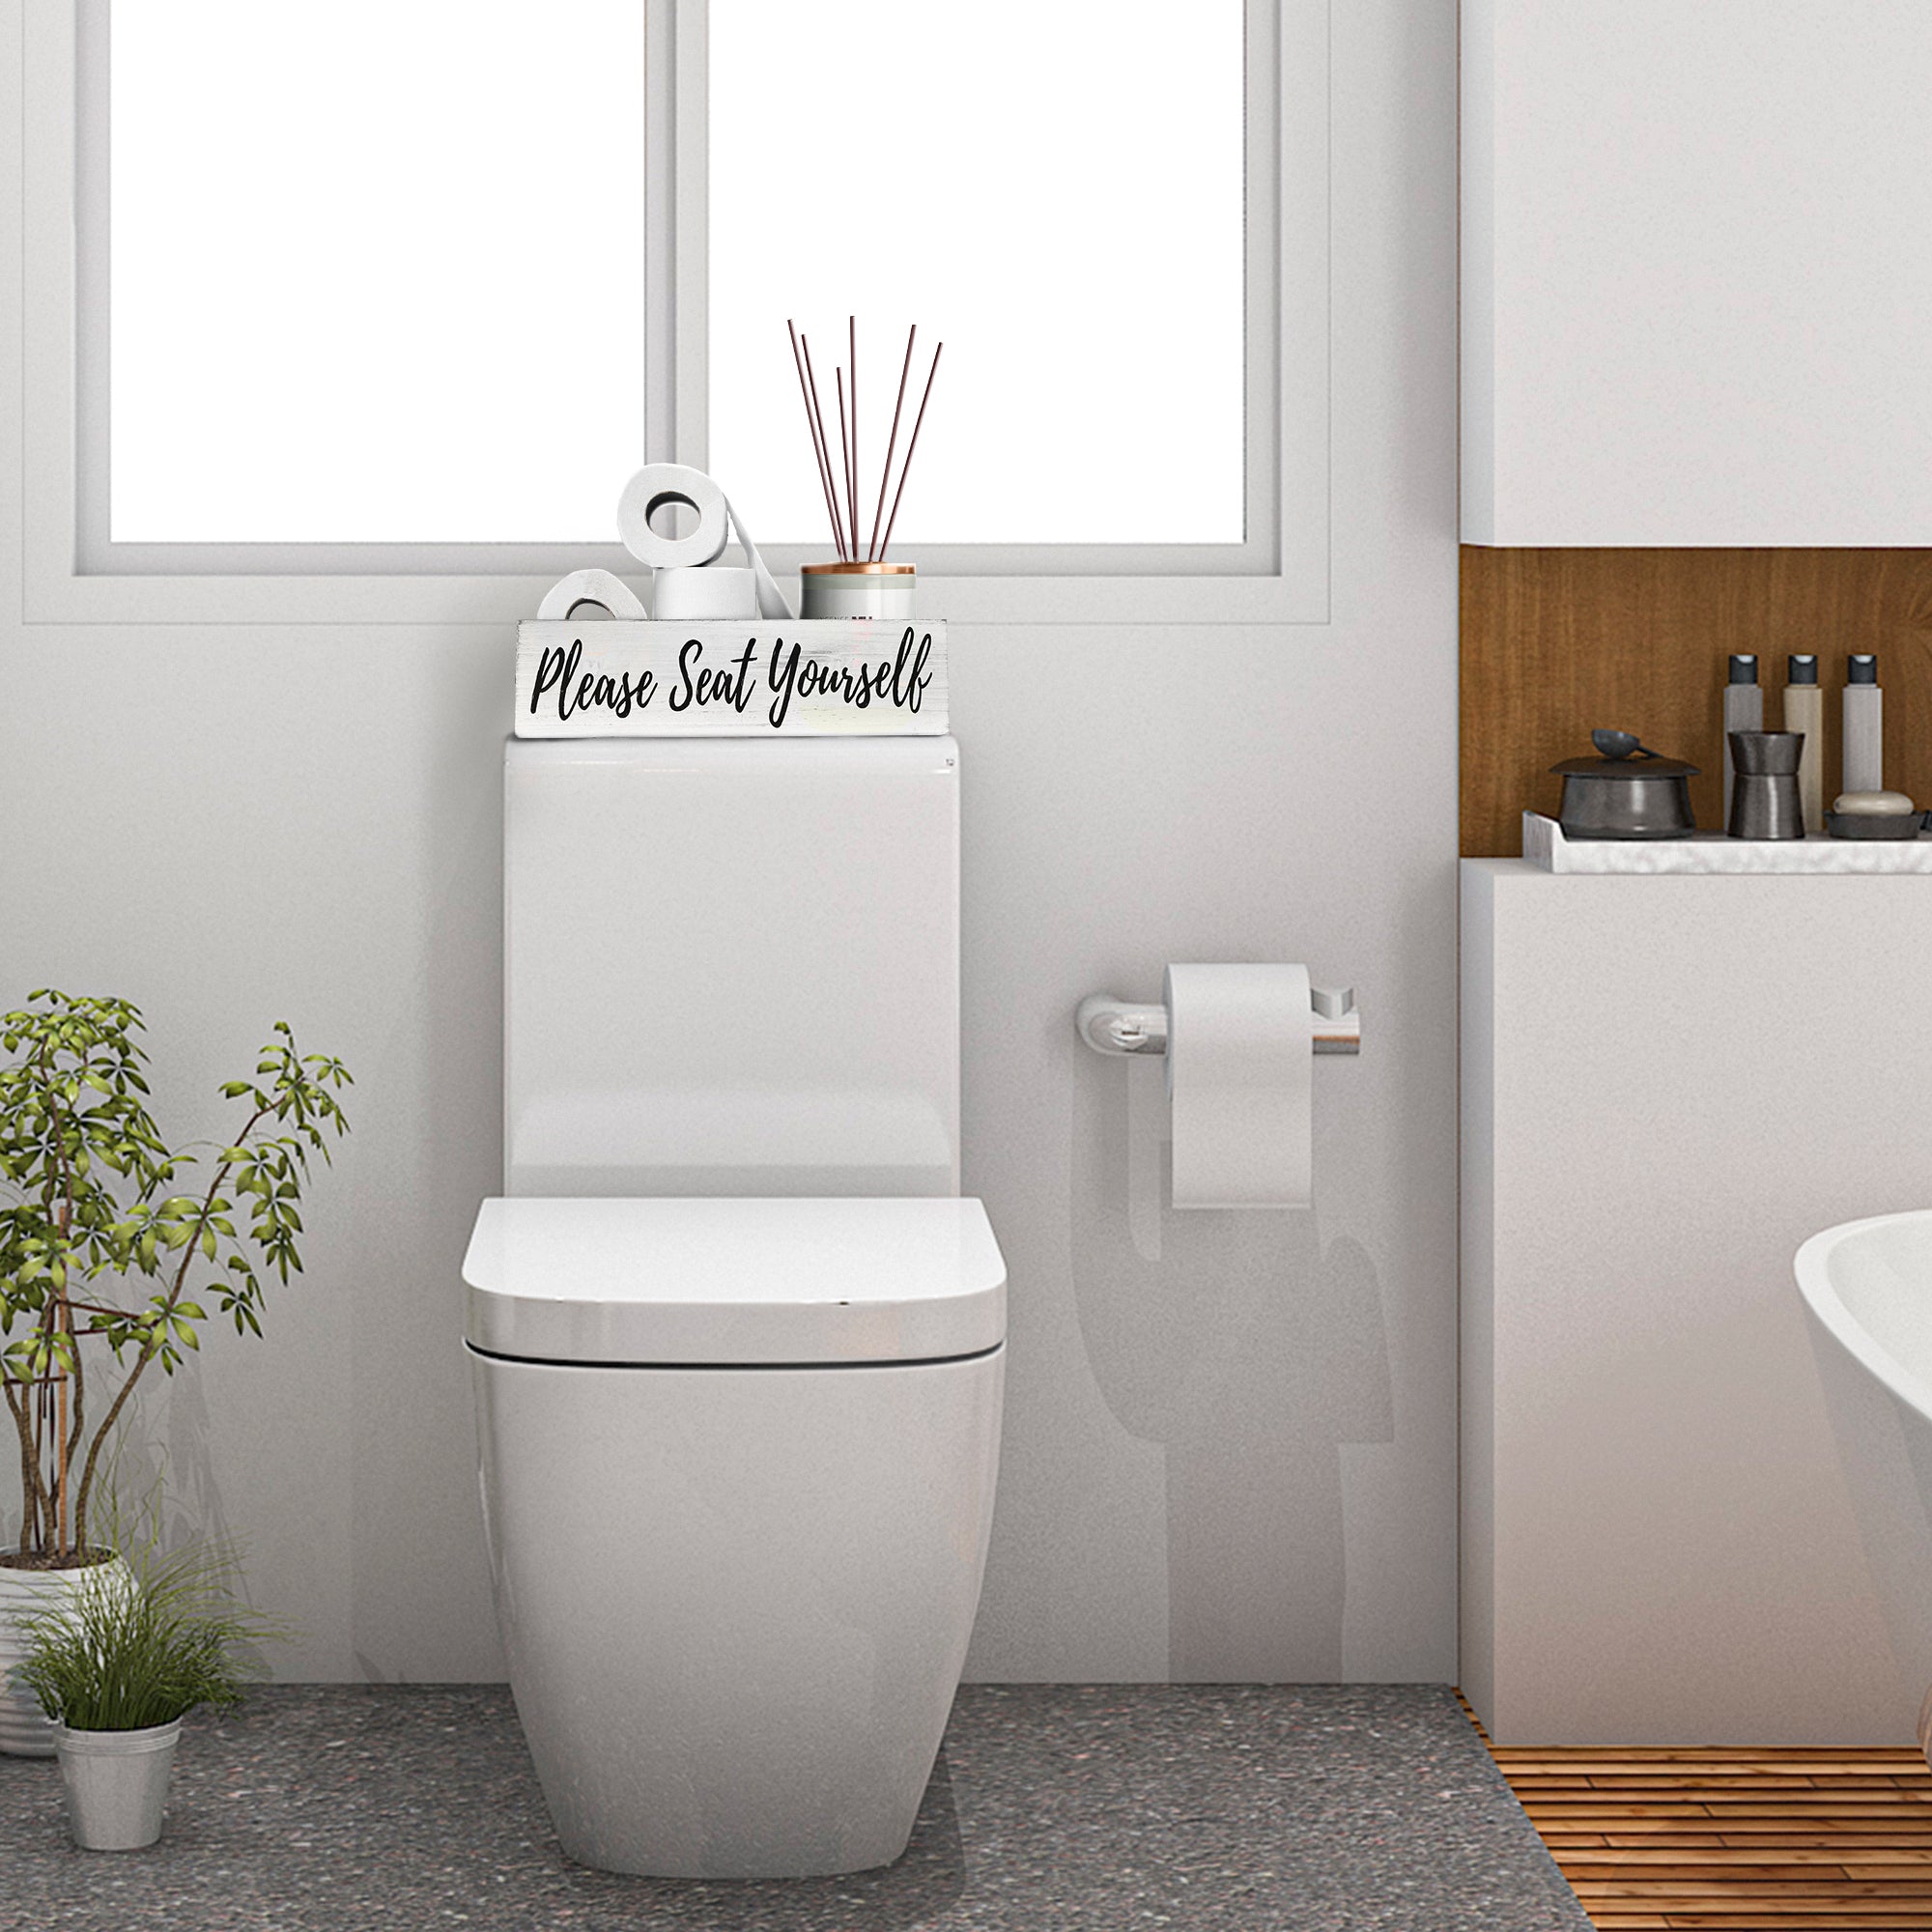 Bathroom Decor Box, 2 Sides with Funny Sayings -Perfect for